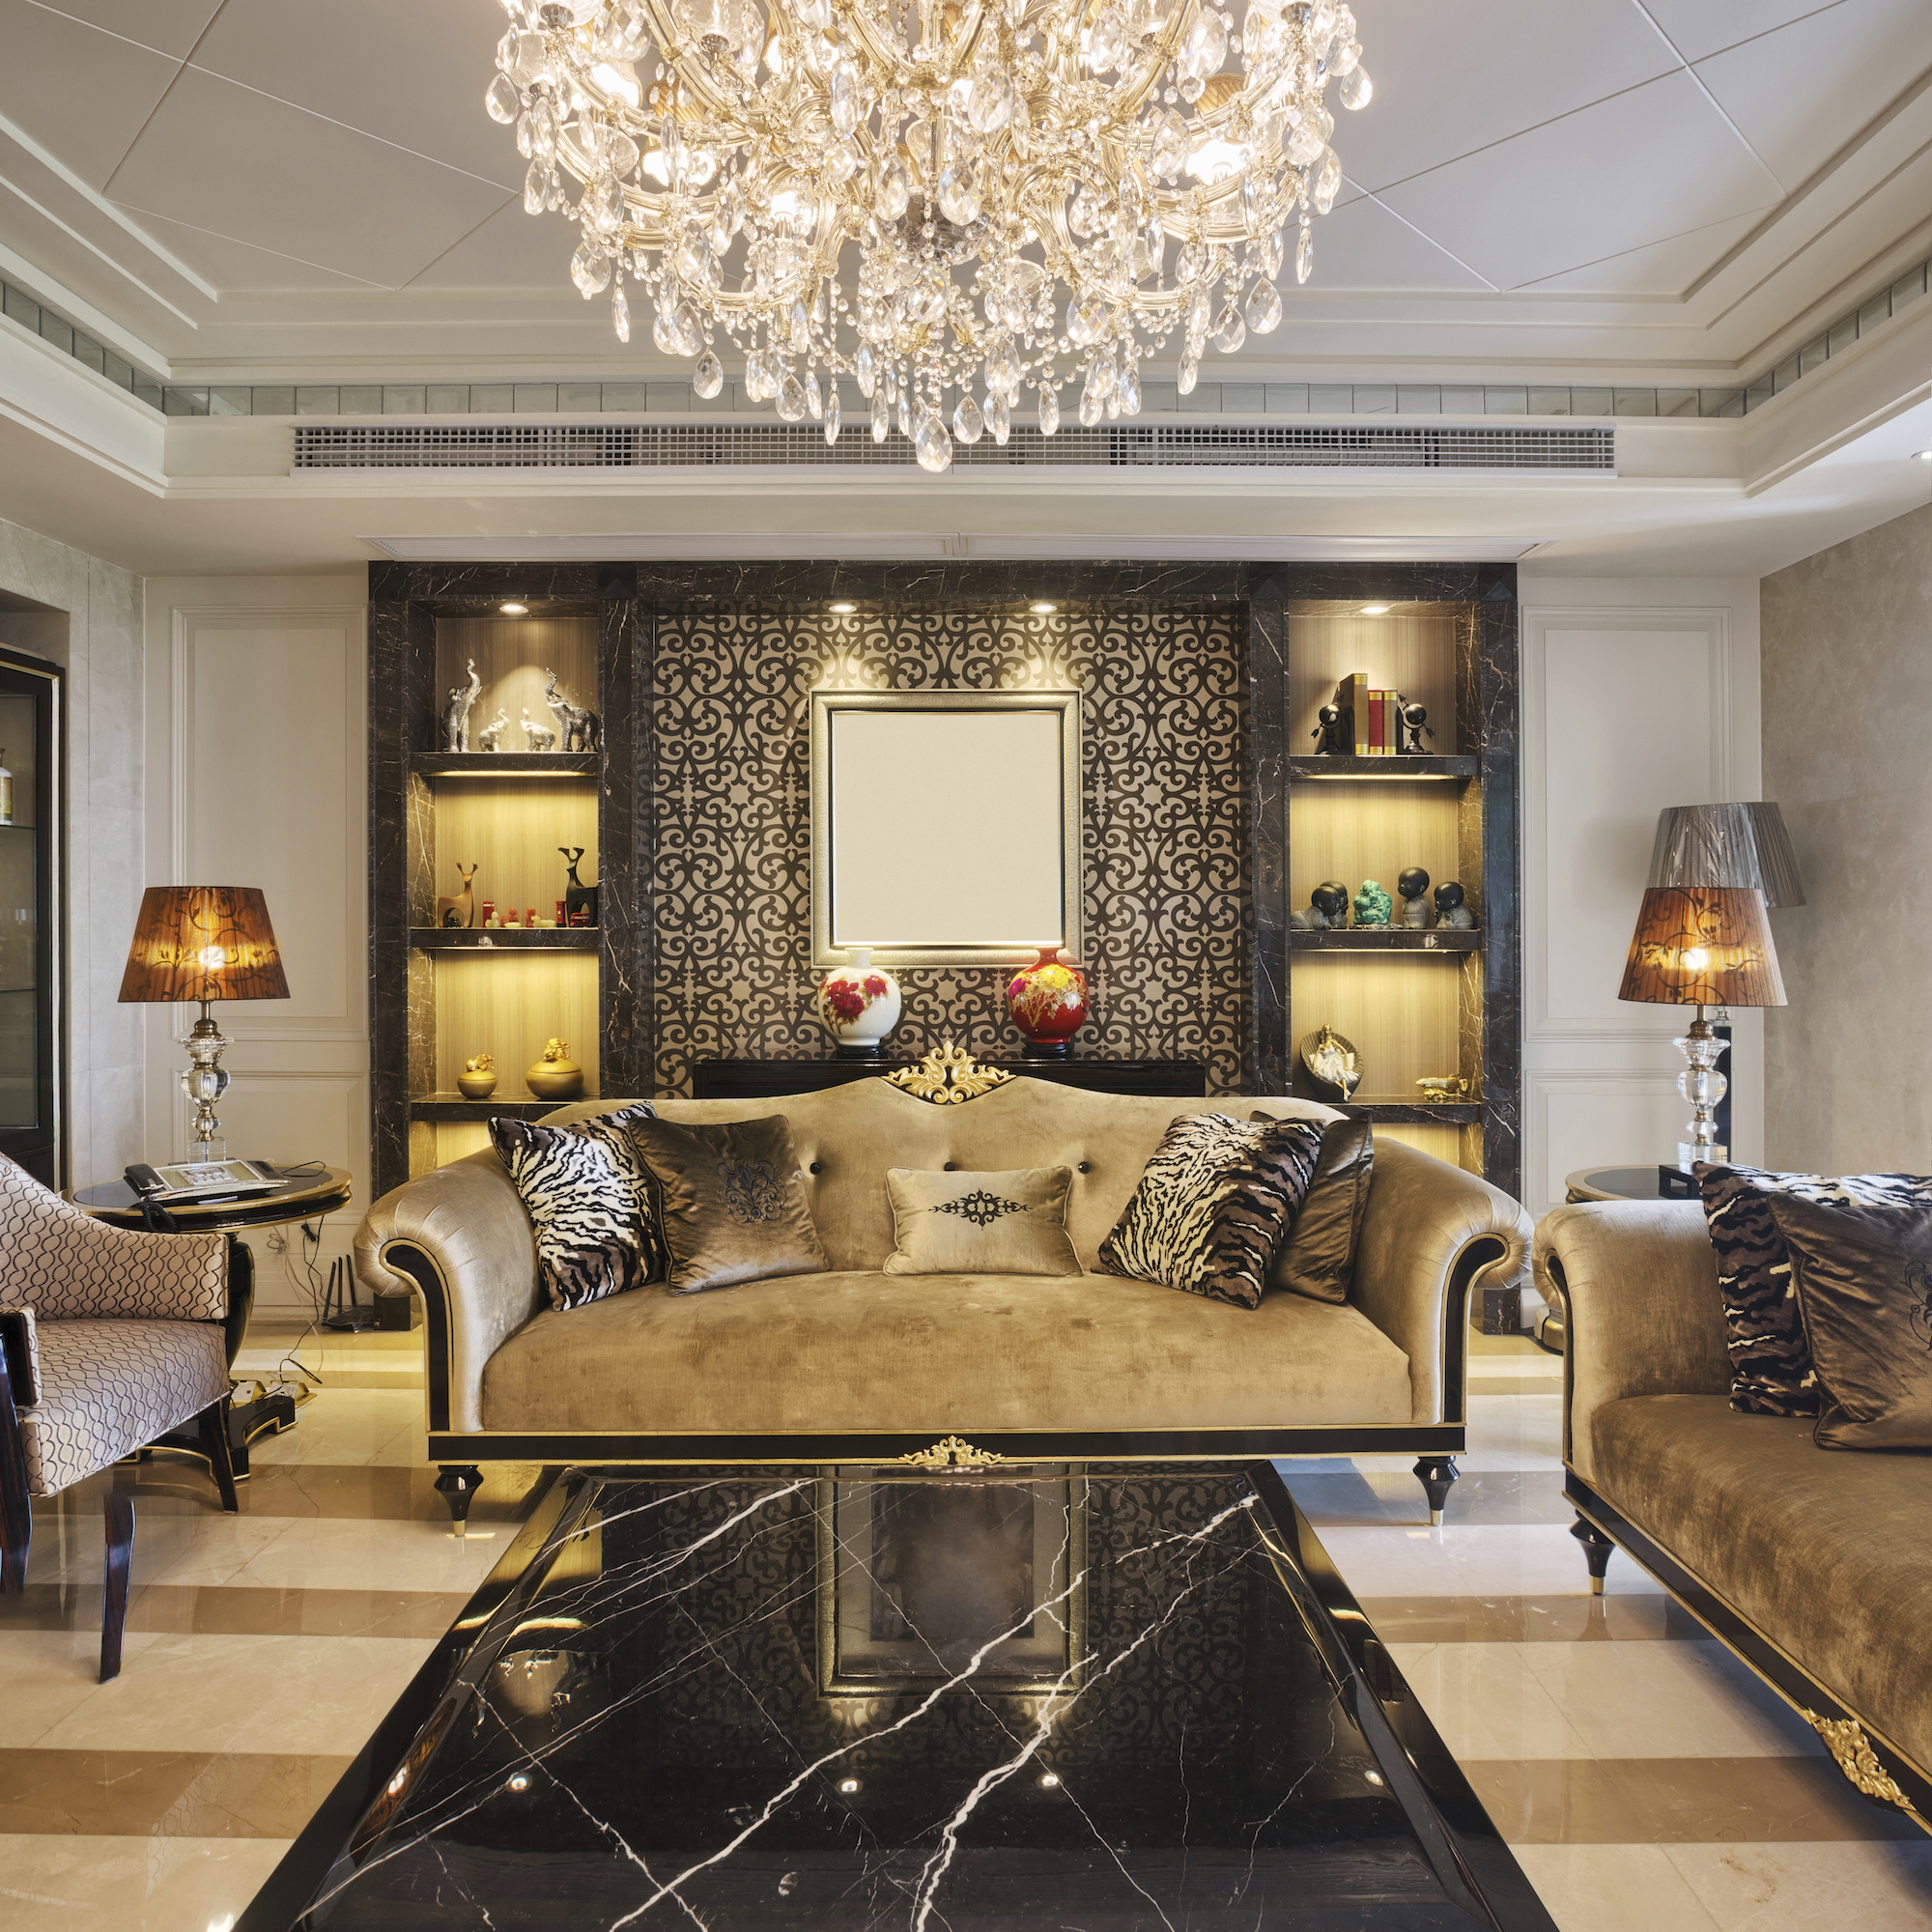 A luxury living room interior with chandelier.